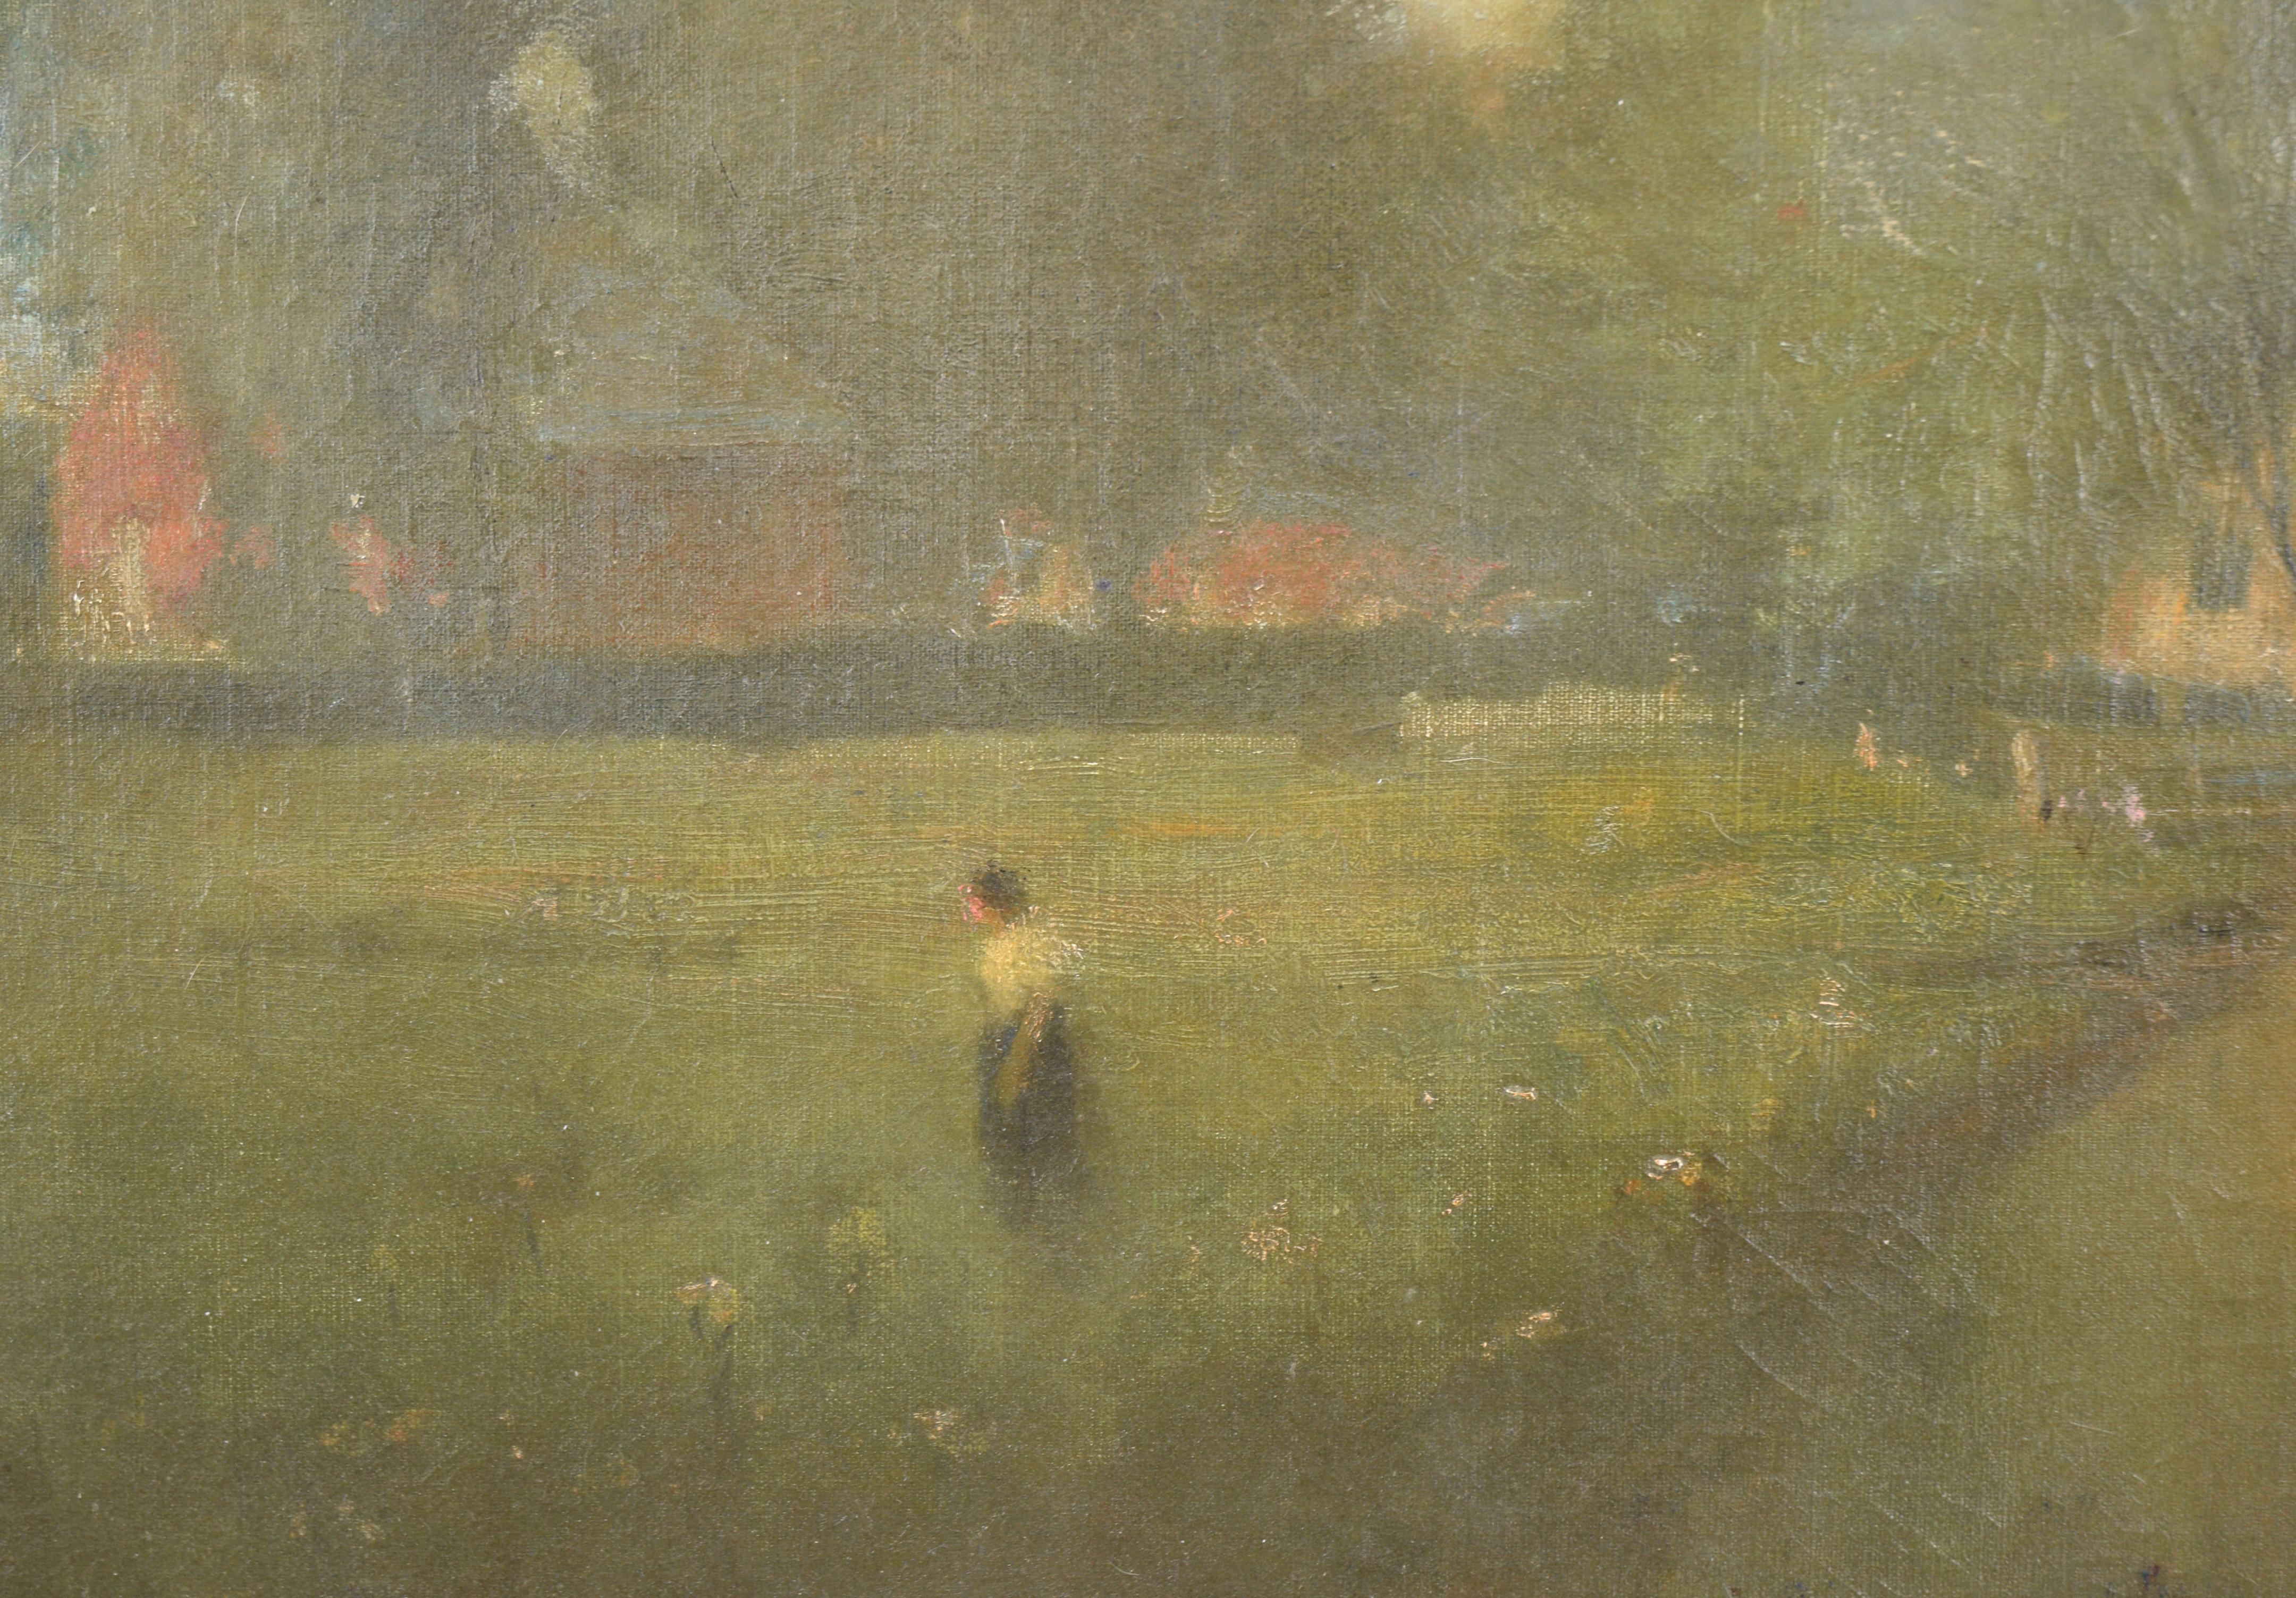 Late 19th Century Tonalist Landscape -- Afternoon by the Pond - Brown Figurative Painting by Willis Seaver Adams